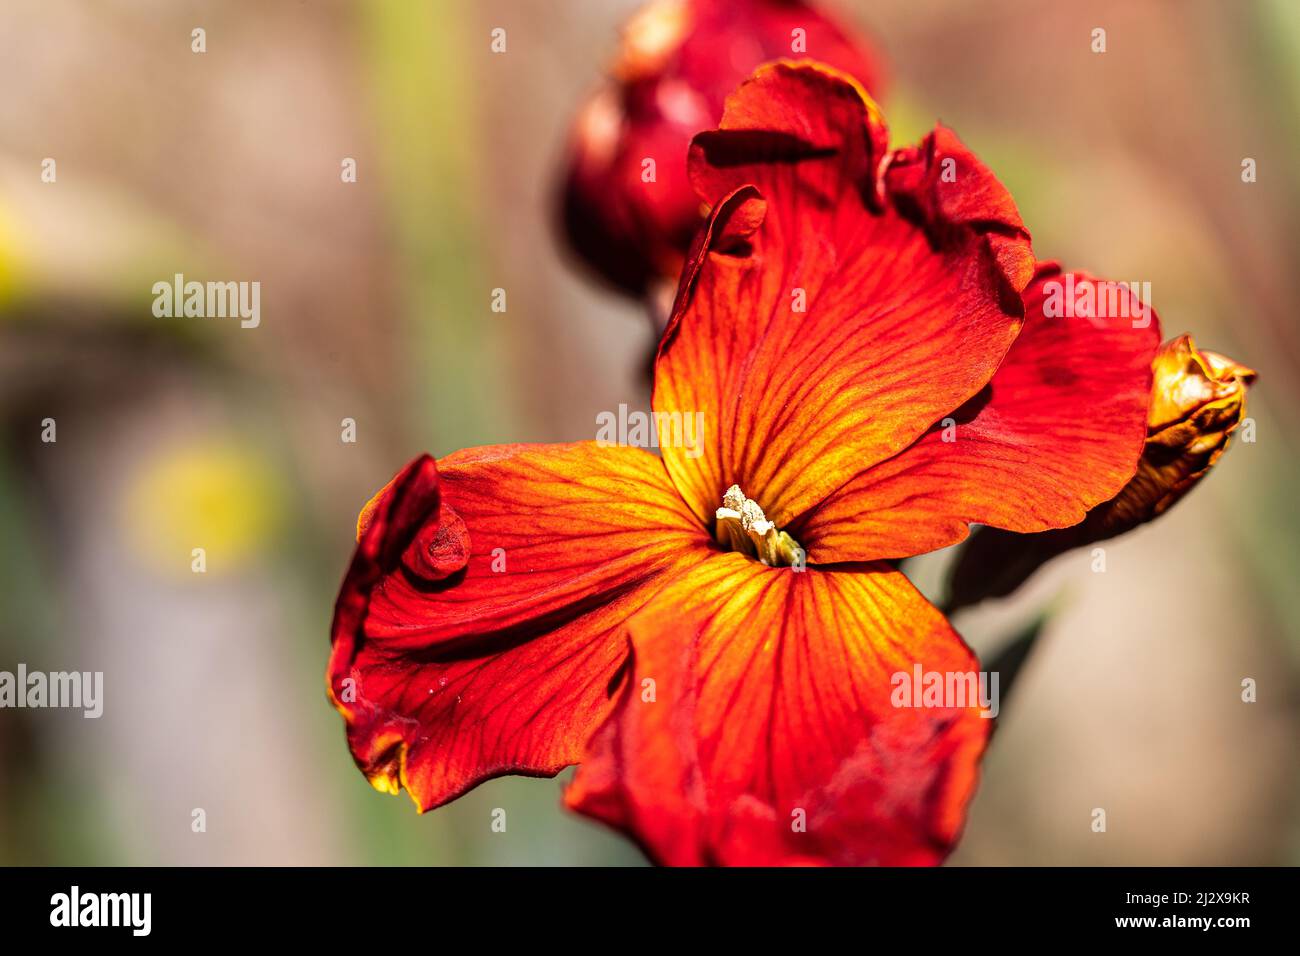 Erysimum - Wallflower Fire king. flowering on a spring day showing the flowers detail Stock Photo